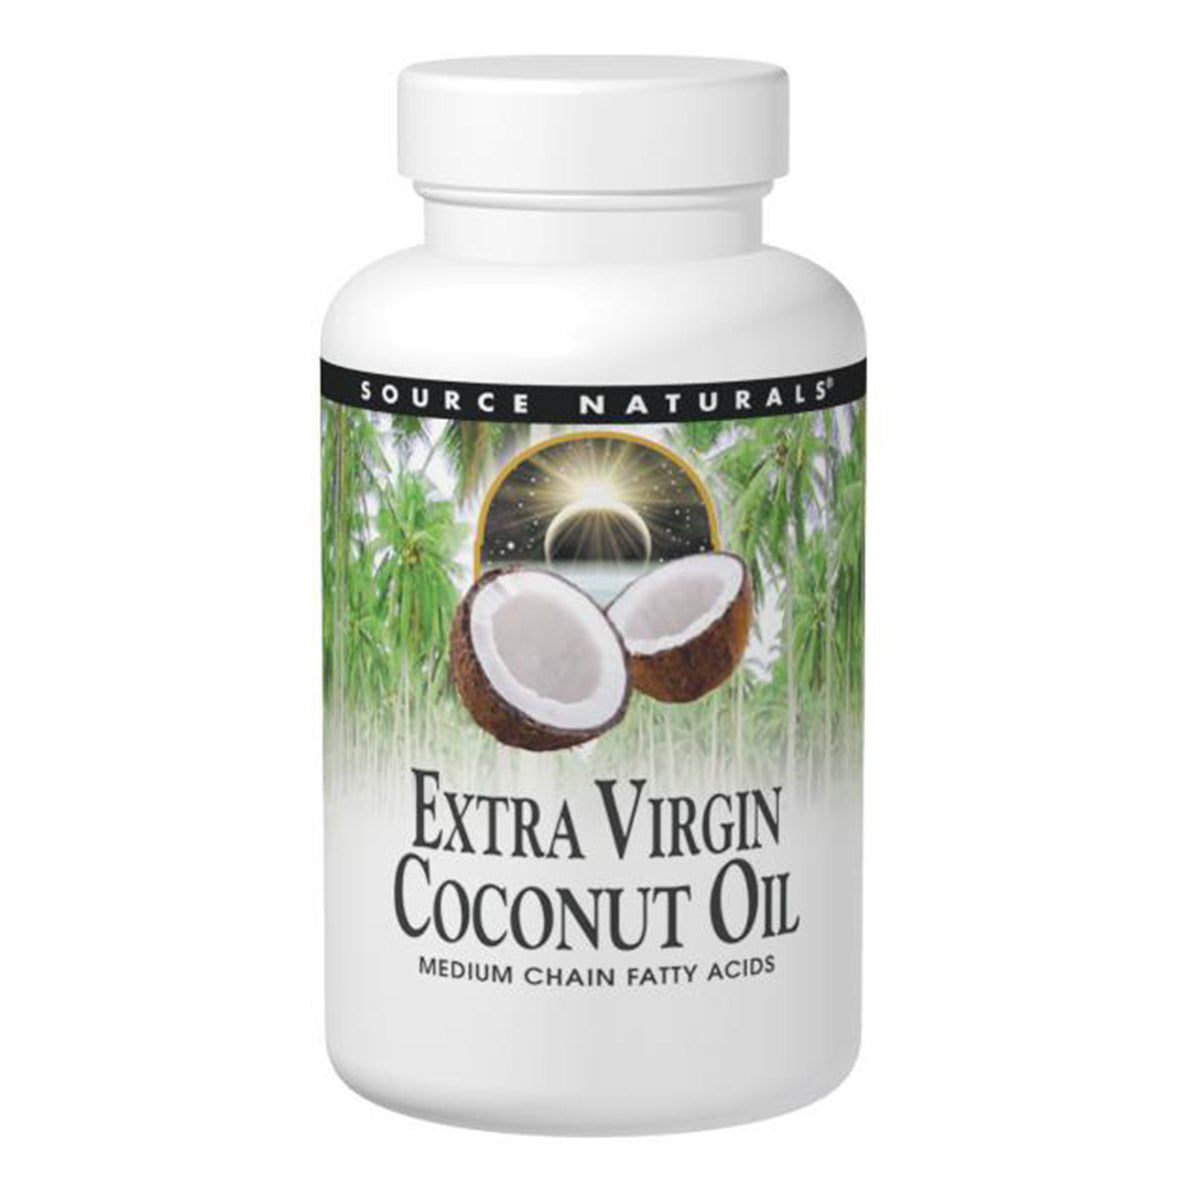 Primary image of Extra Virgin Coconut Oil Softgels